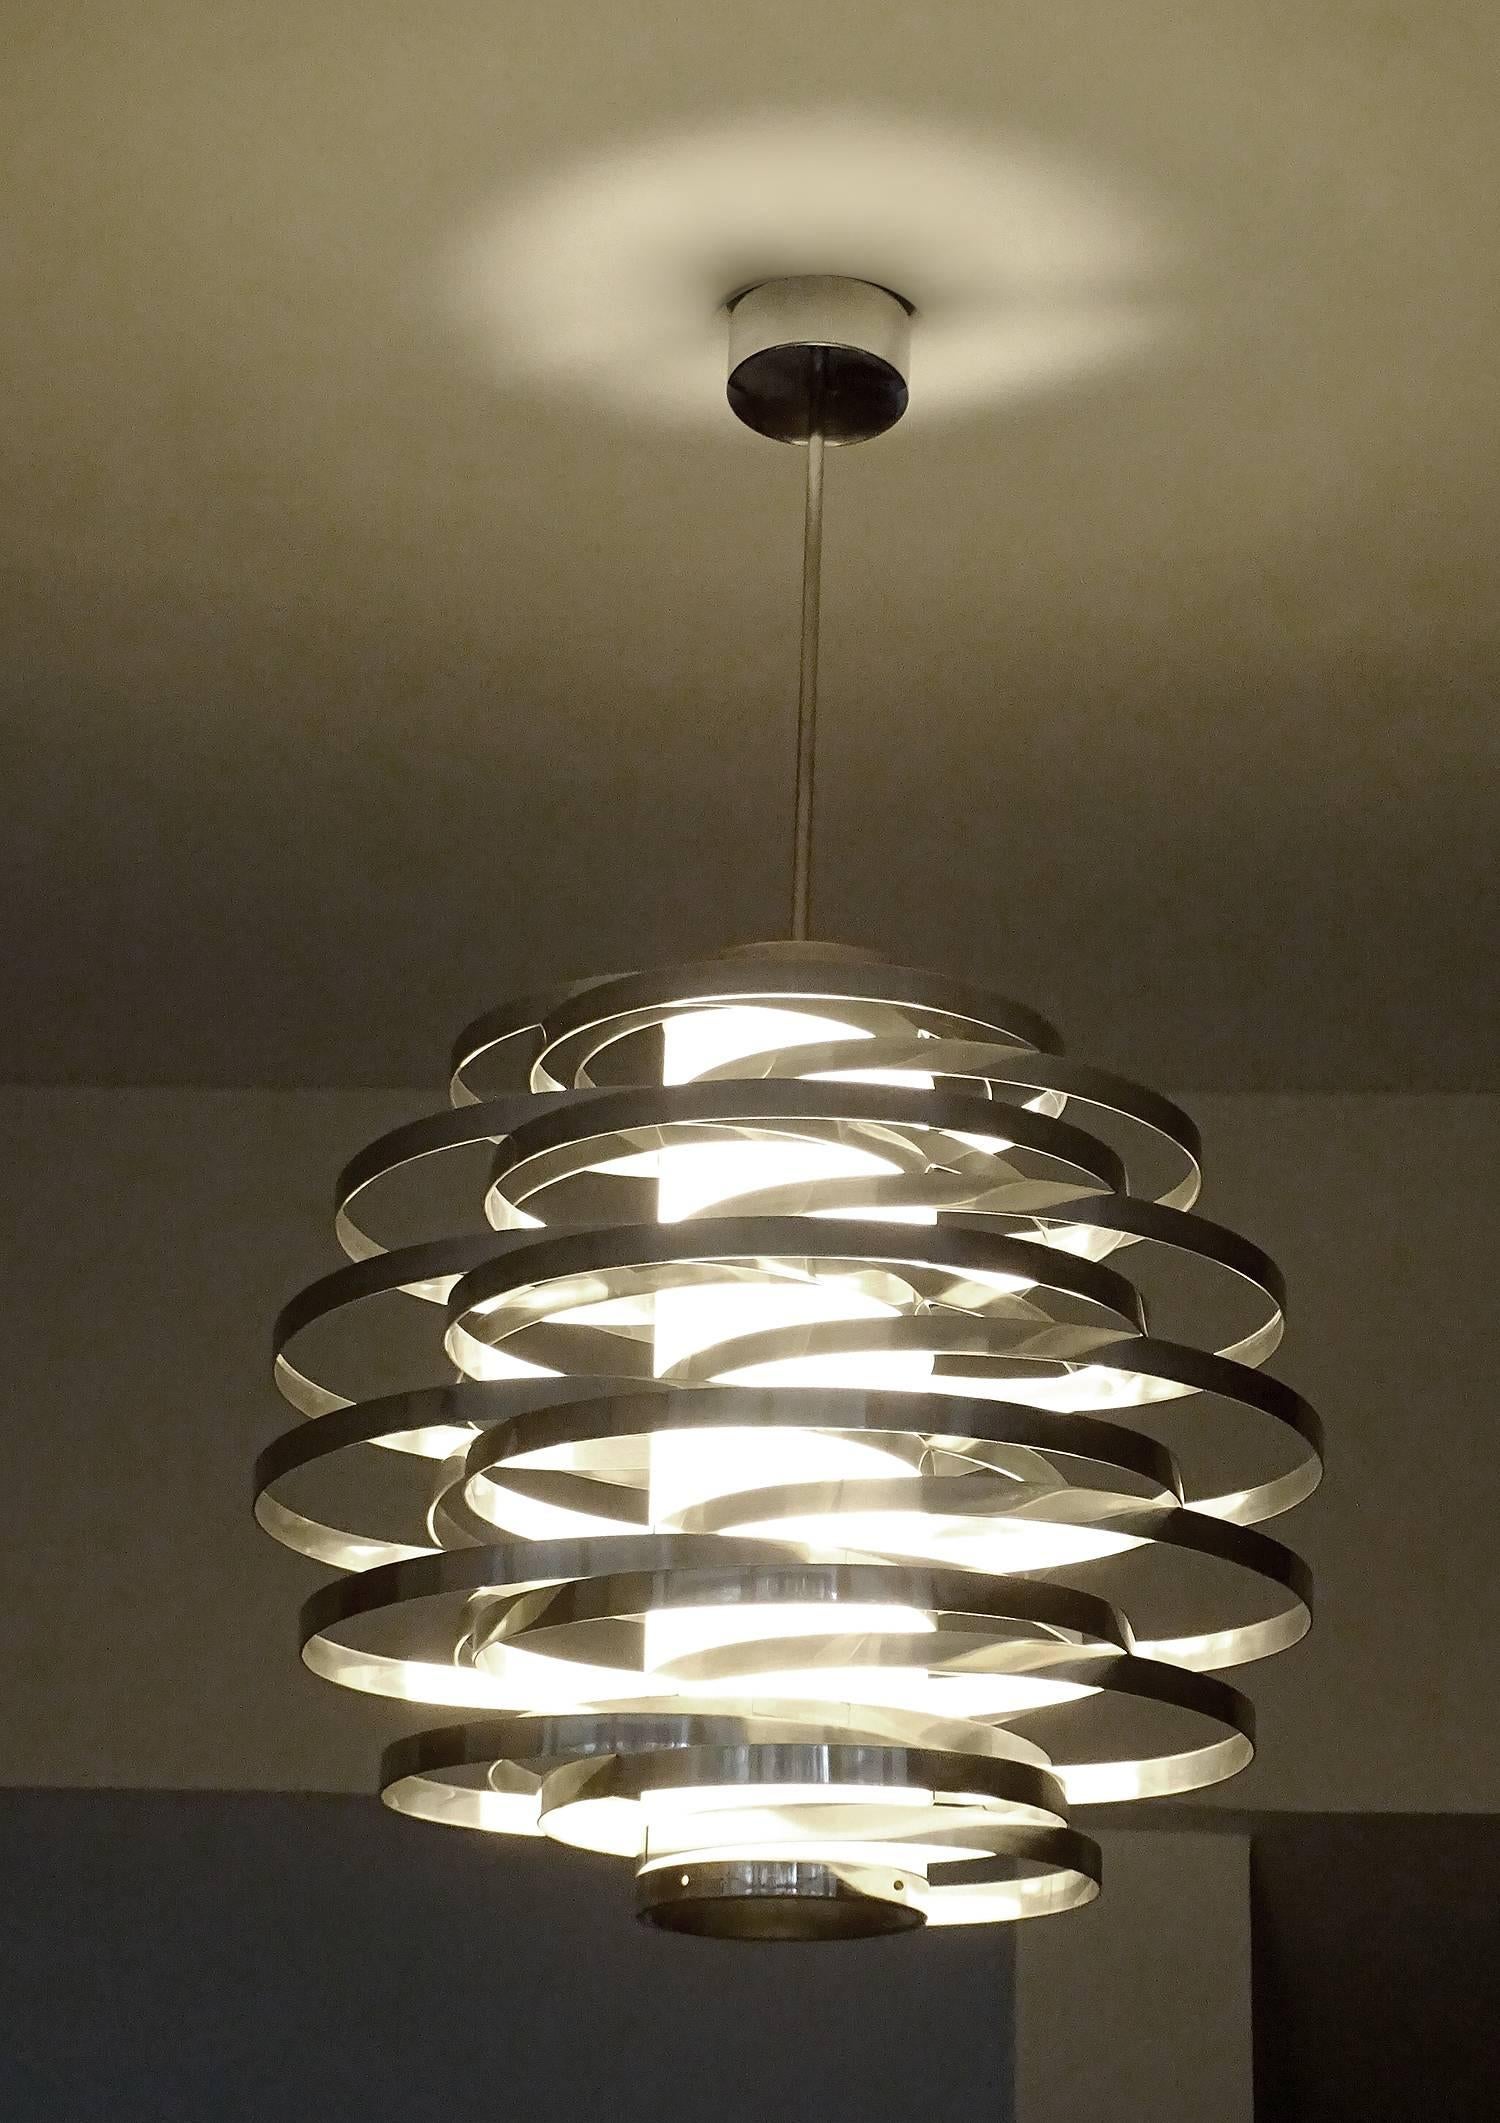 Mid Century chandelier by  Sciolari Roma, this is the so called cyclone model, the effect of which has been achieved by superimposed stainless steel rings attached to a plexiglas central column.

Two standard size bulbs @ 60 watts, rewired - LED